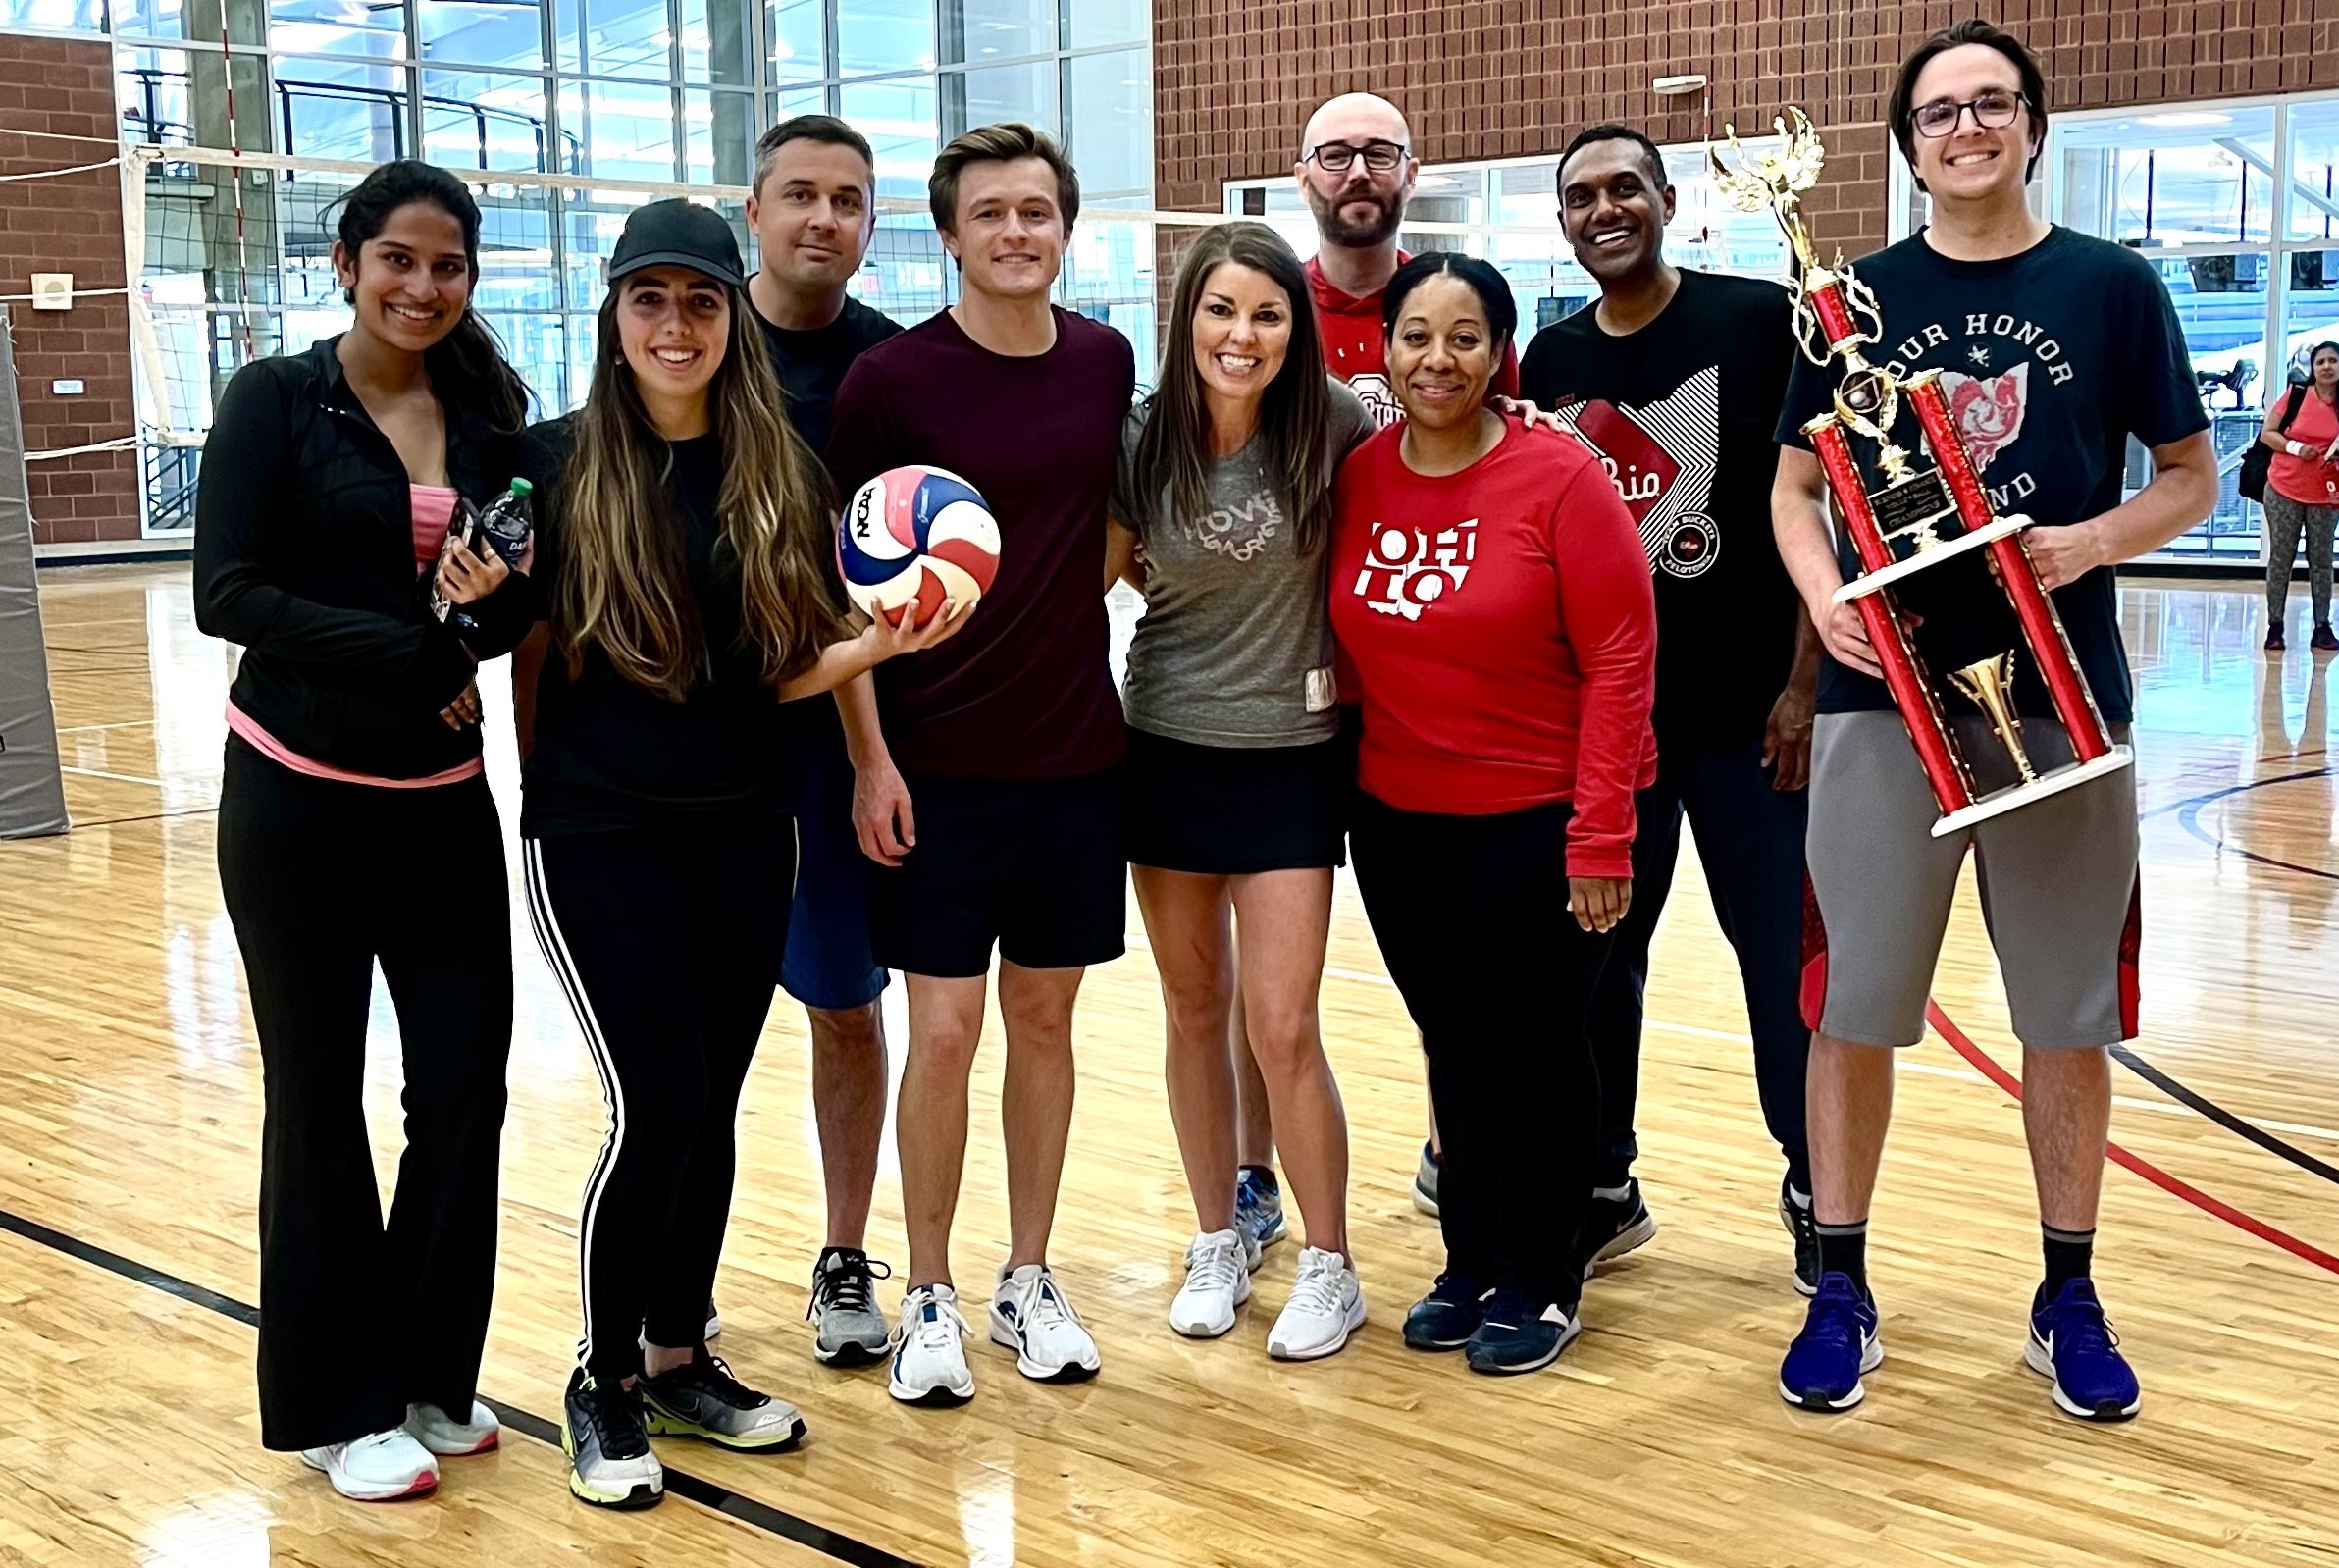 Investment Team BF FitFest Volleyball Champions